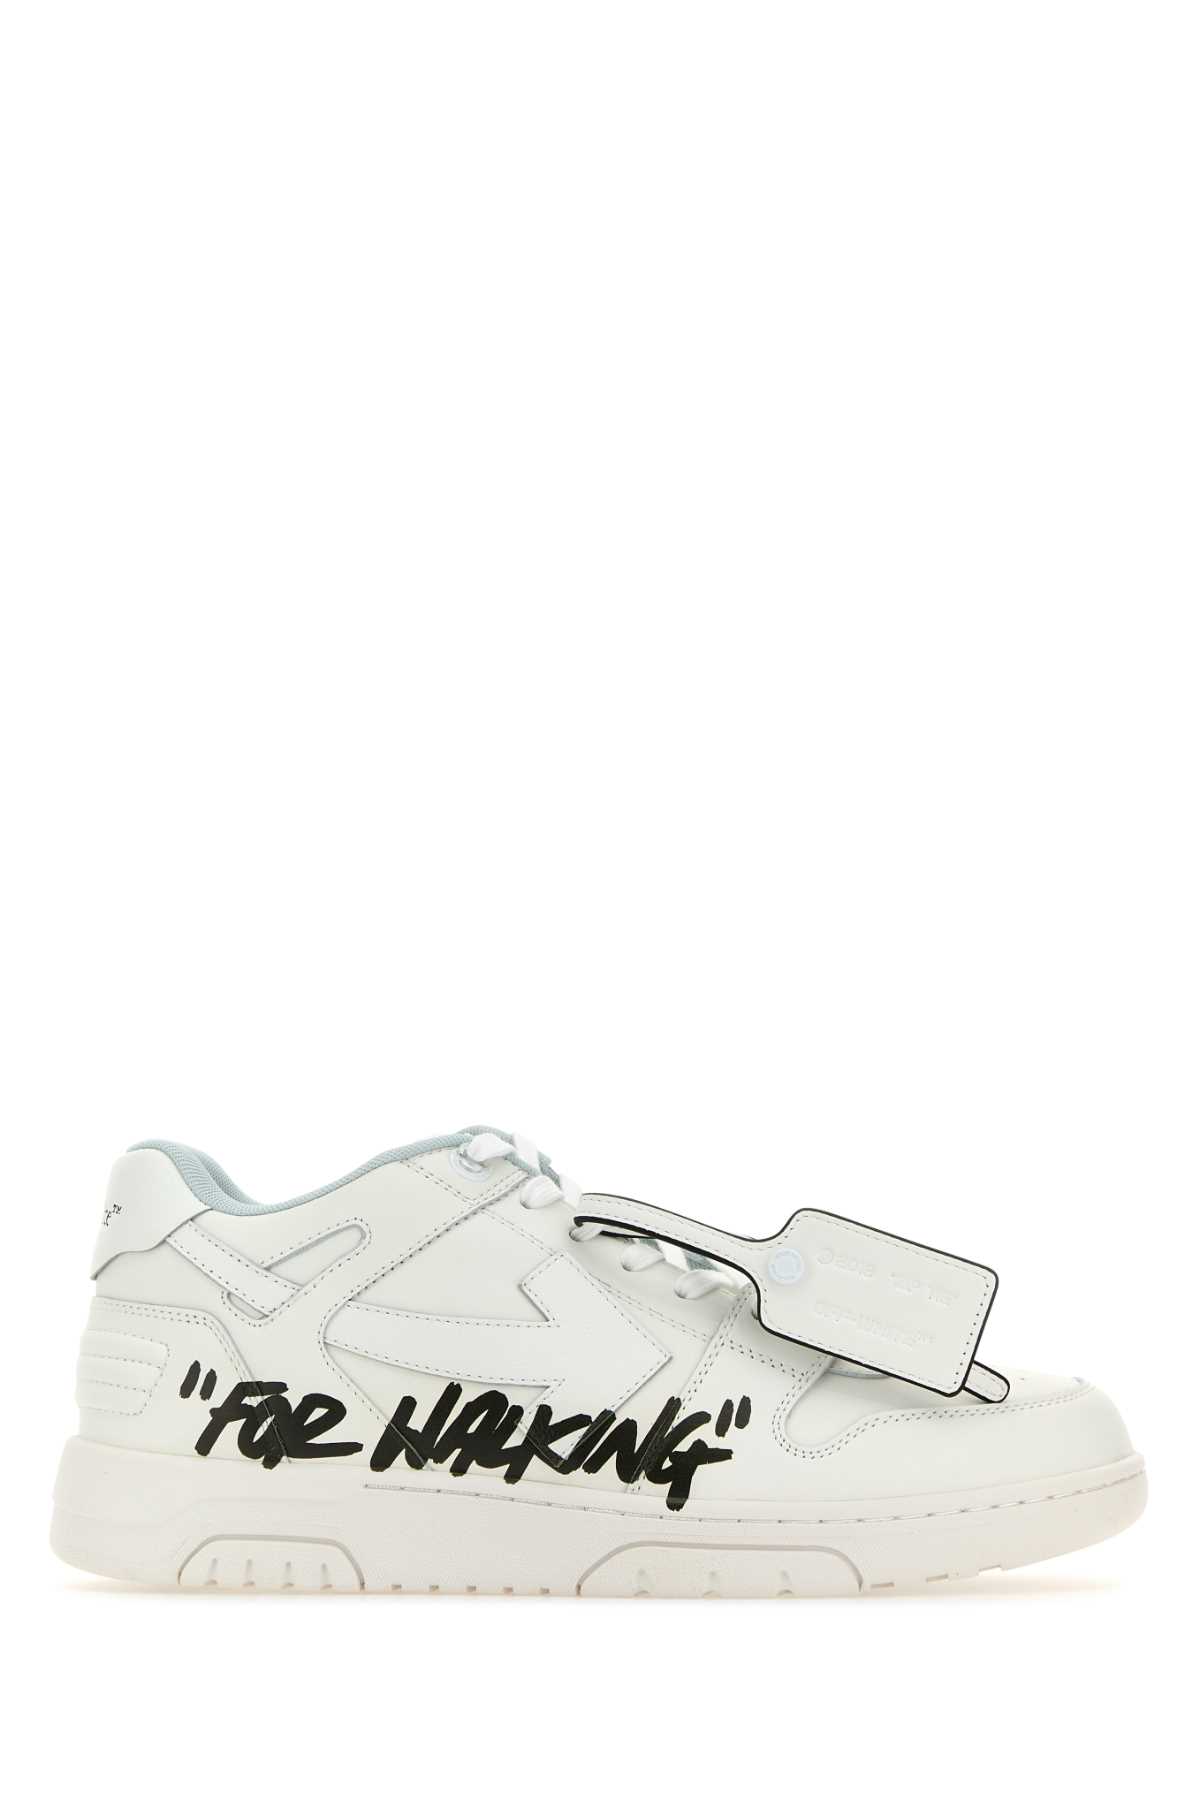 OFF-WHITE WHITE LEATHER OUT OF OFFICE FOR WALKING SNEAKERS